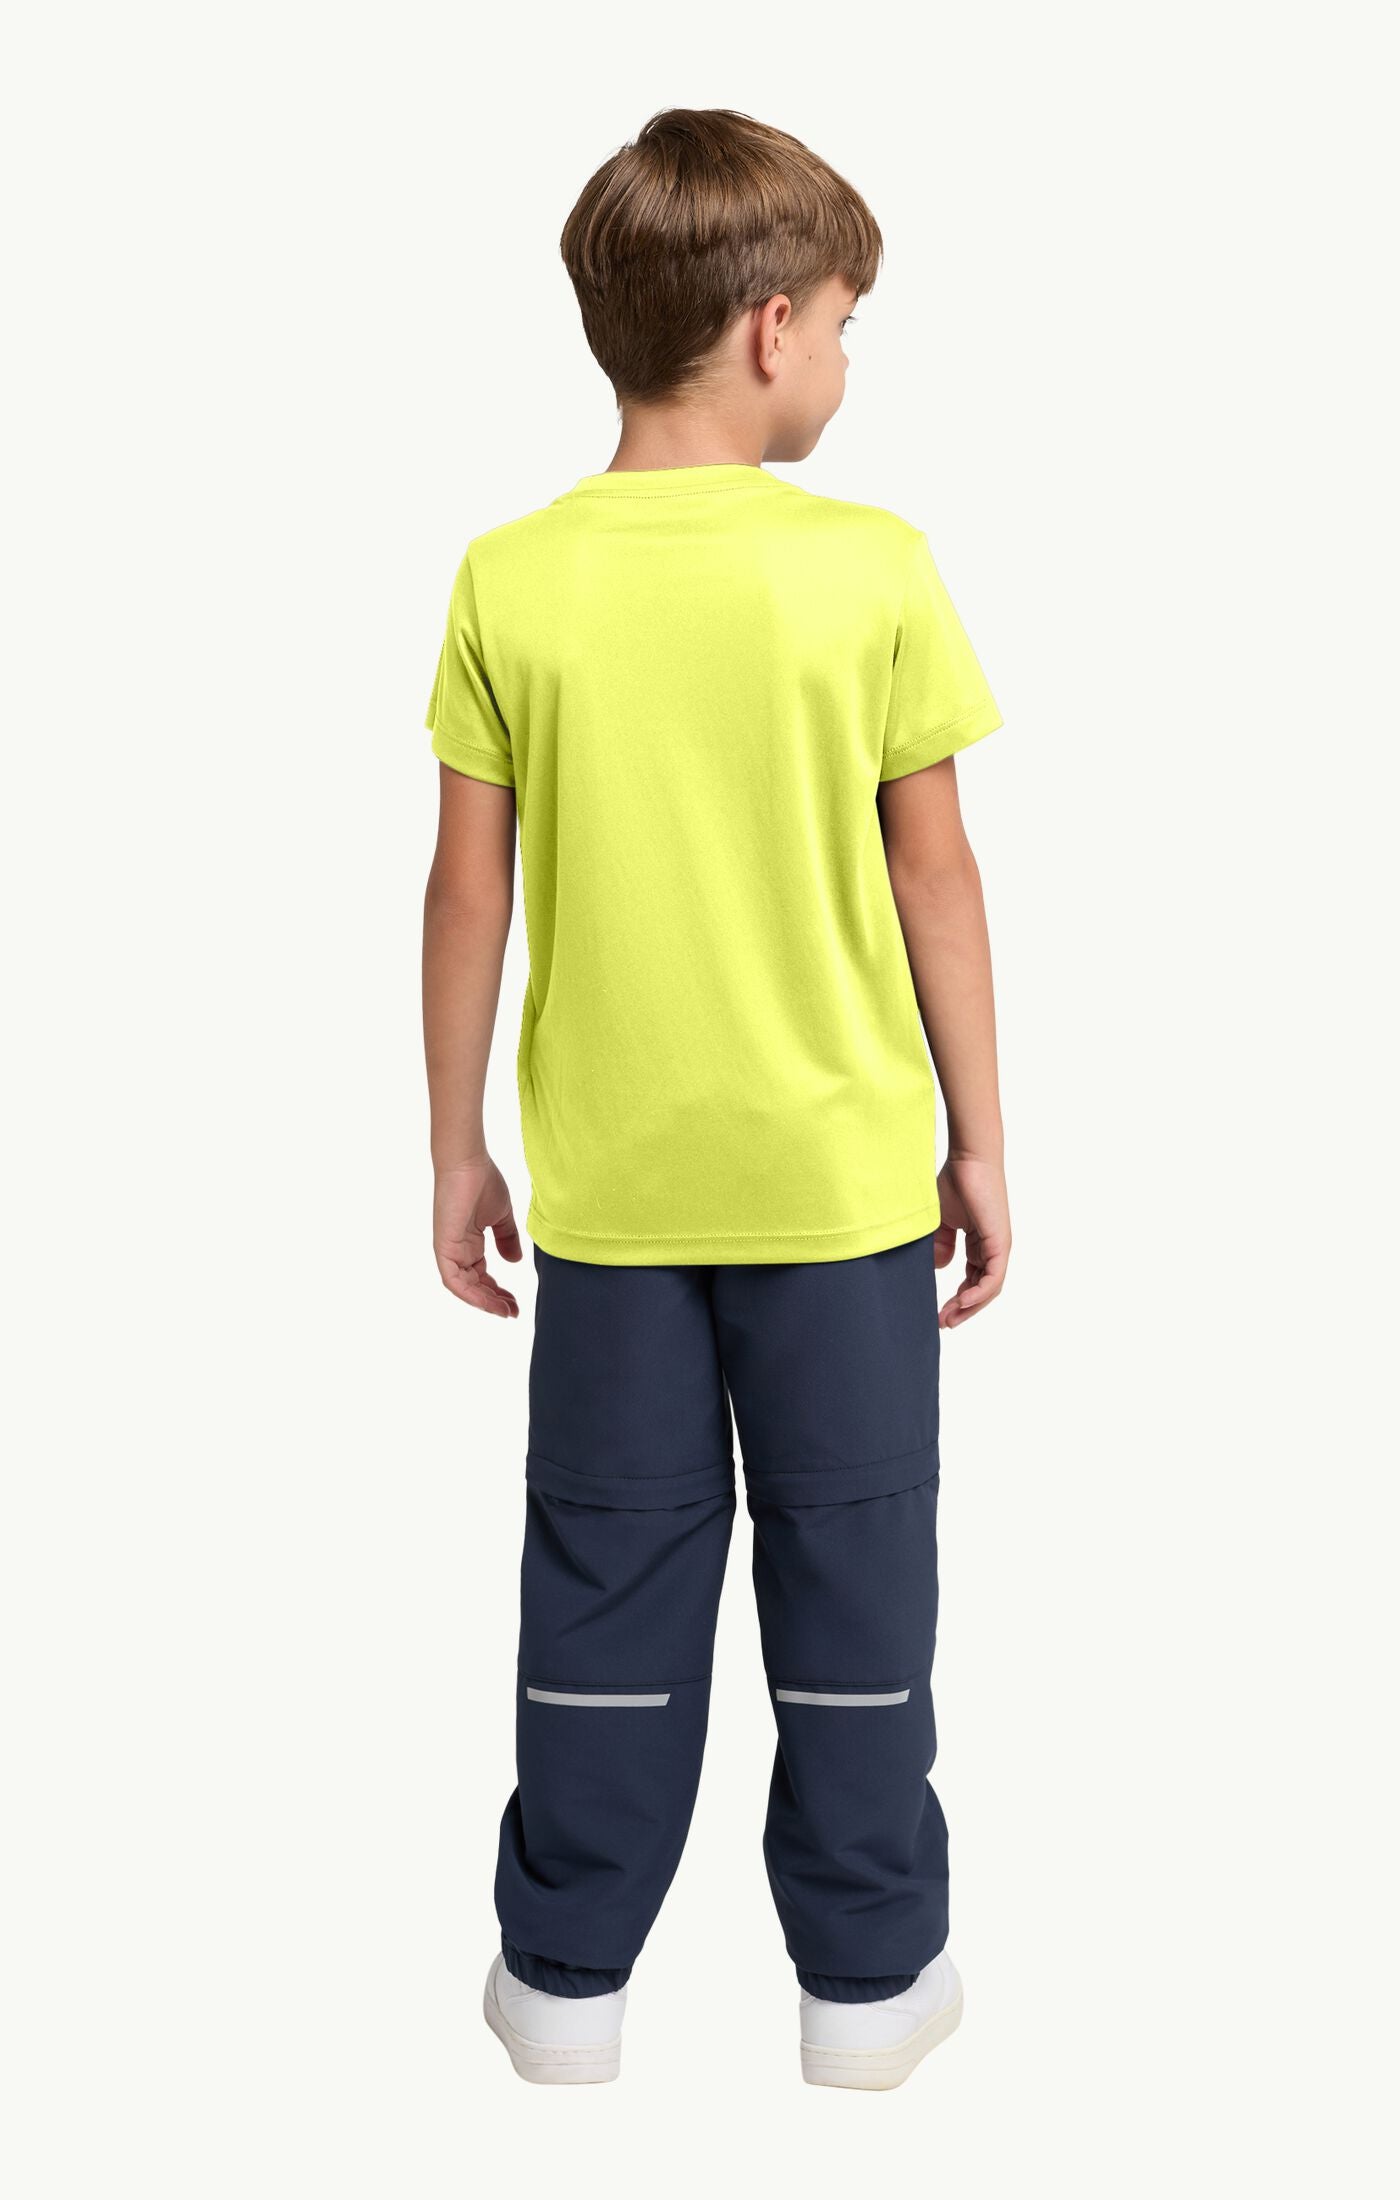 Jack Wolfskin Active Solid T-Shirt JuniorAlive & Dirty 